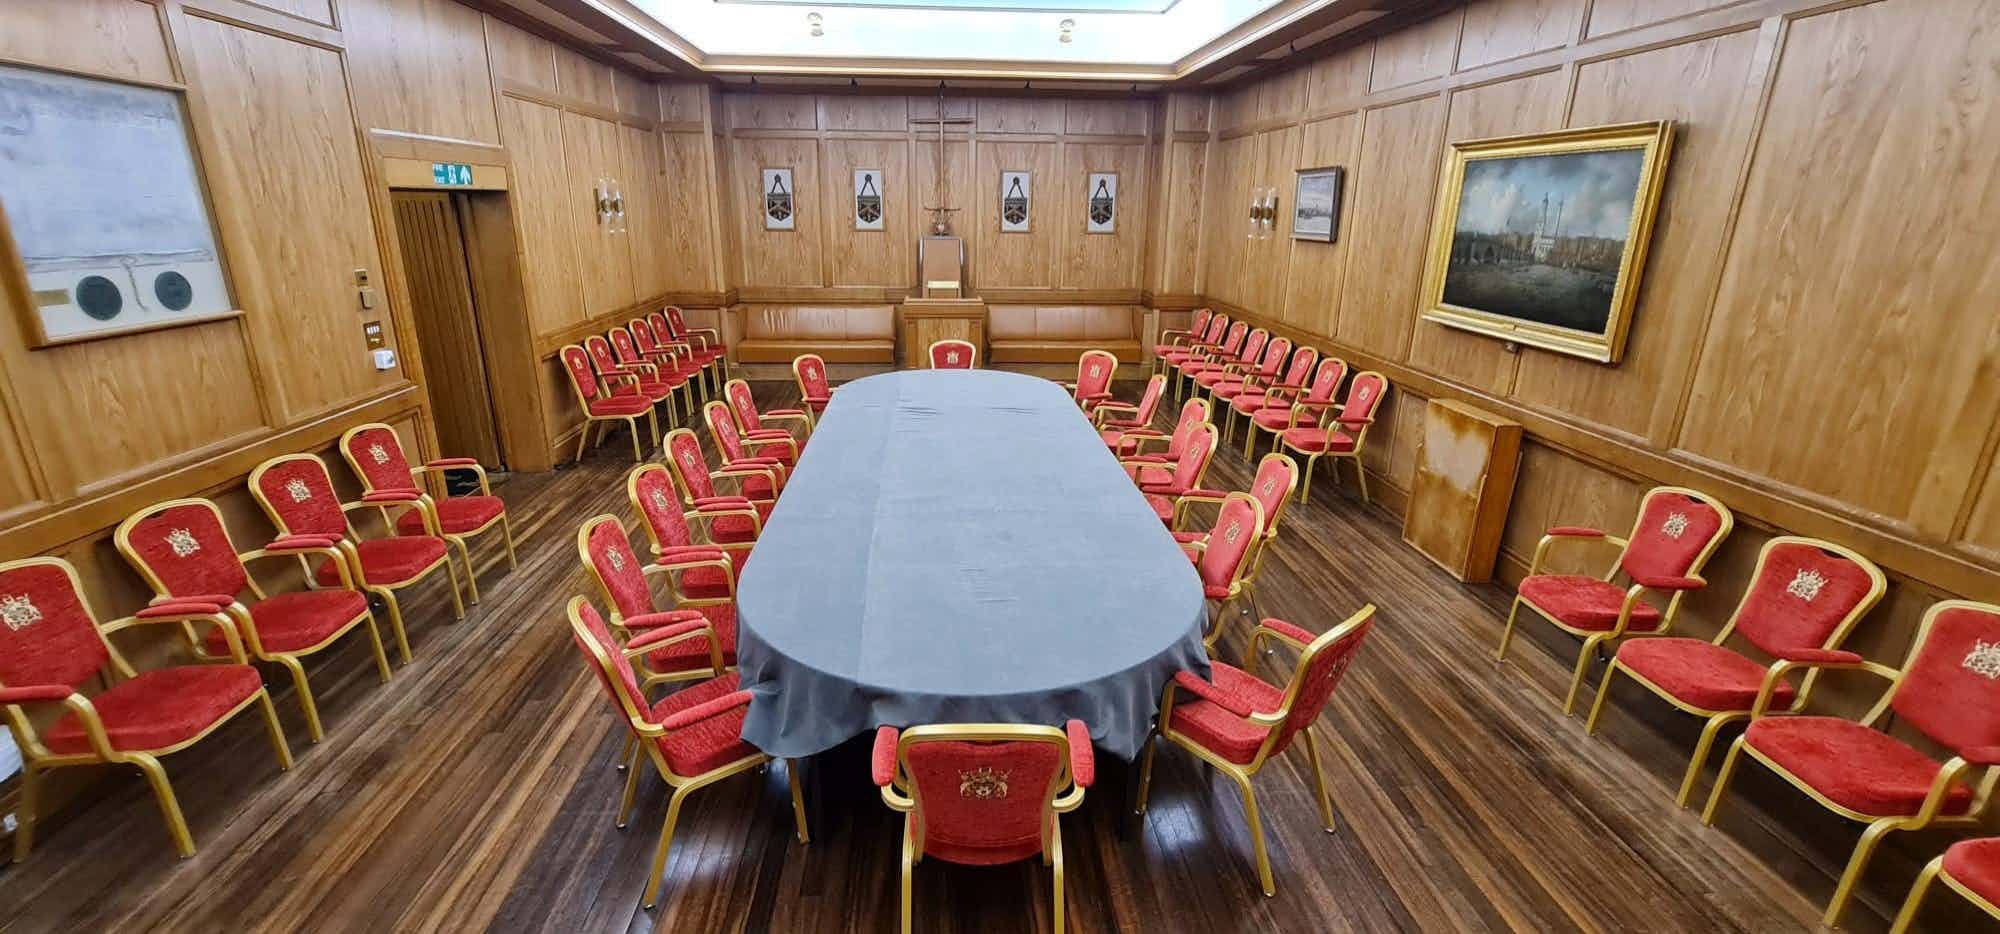 The Court Room, Bakers Hall